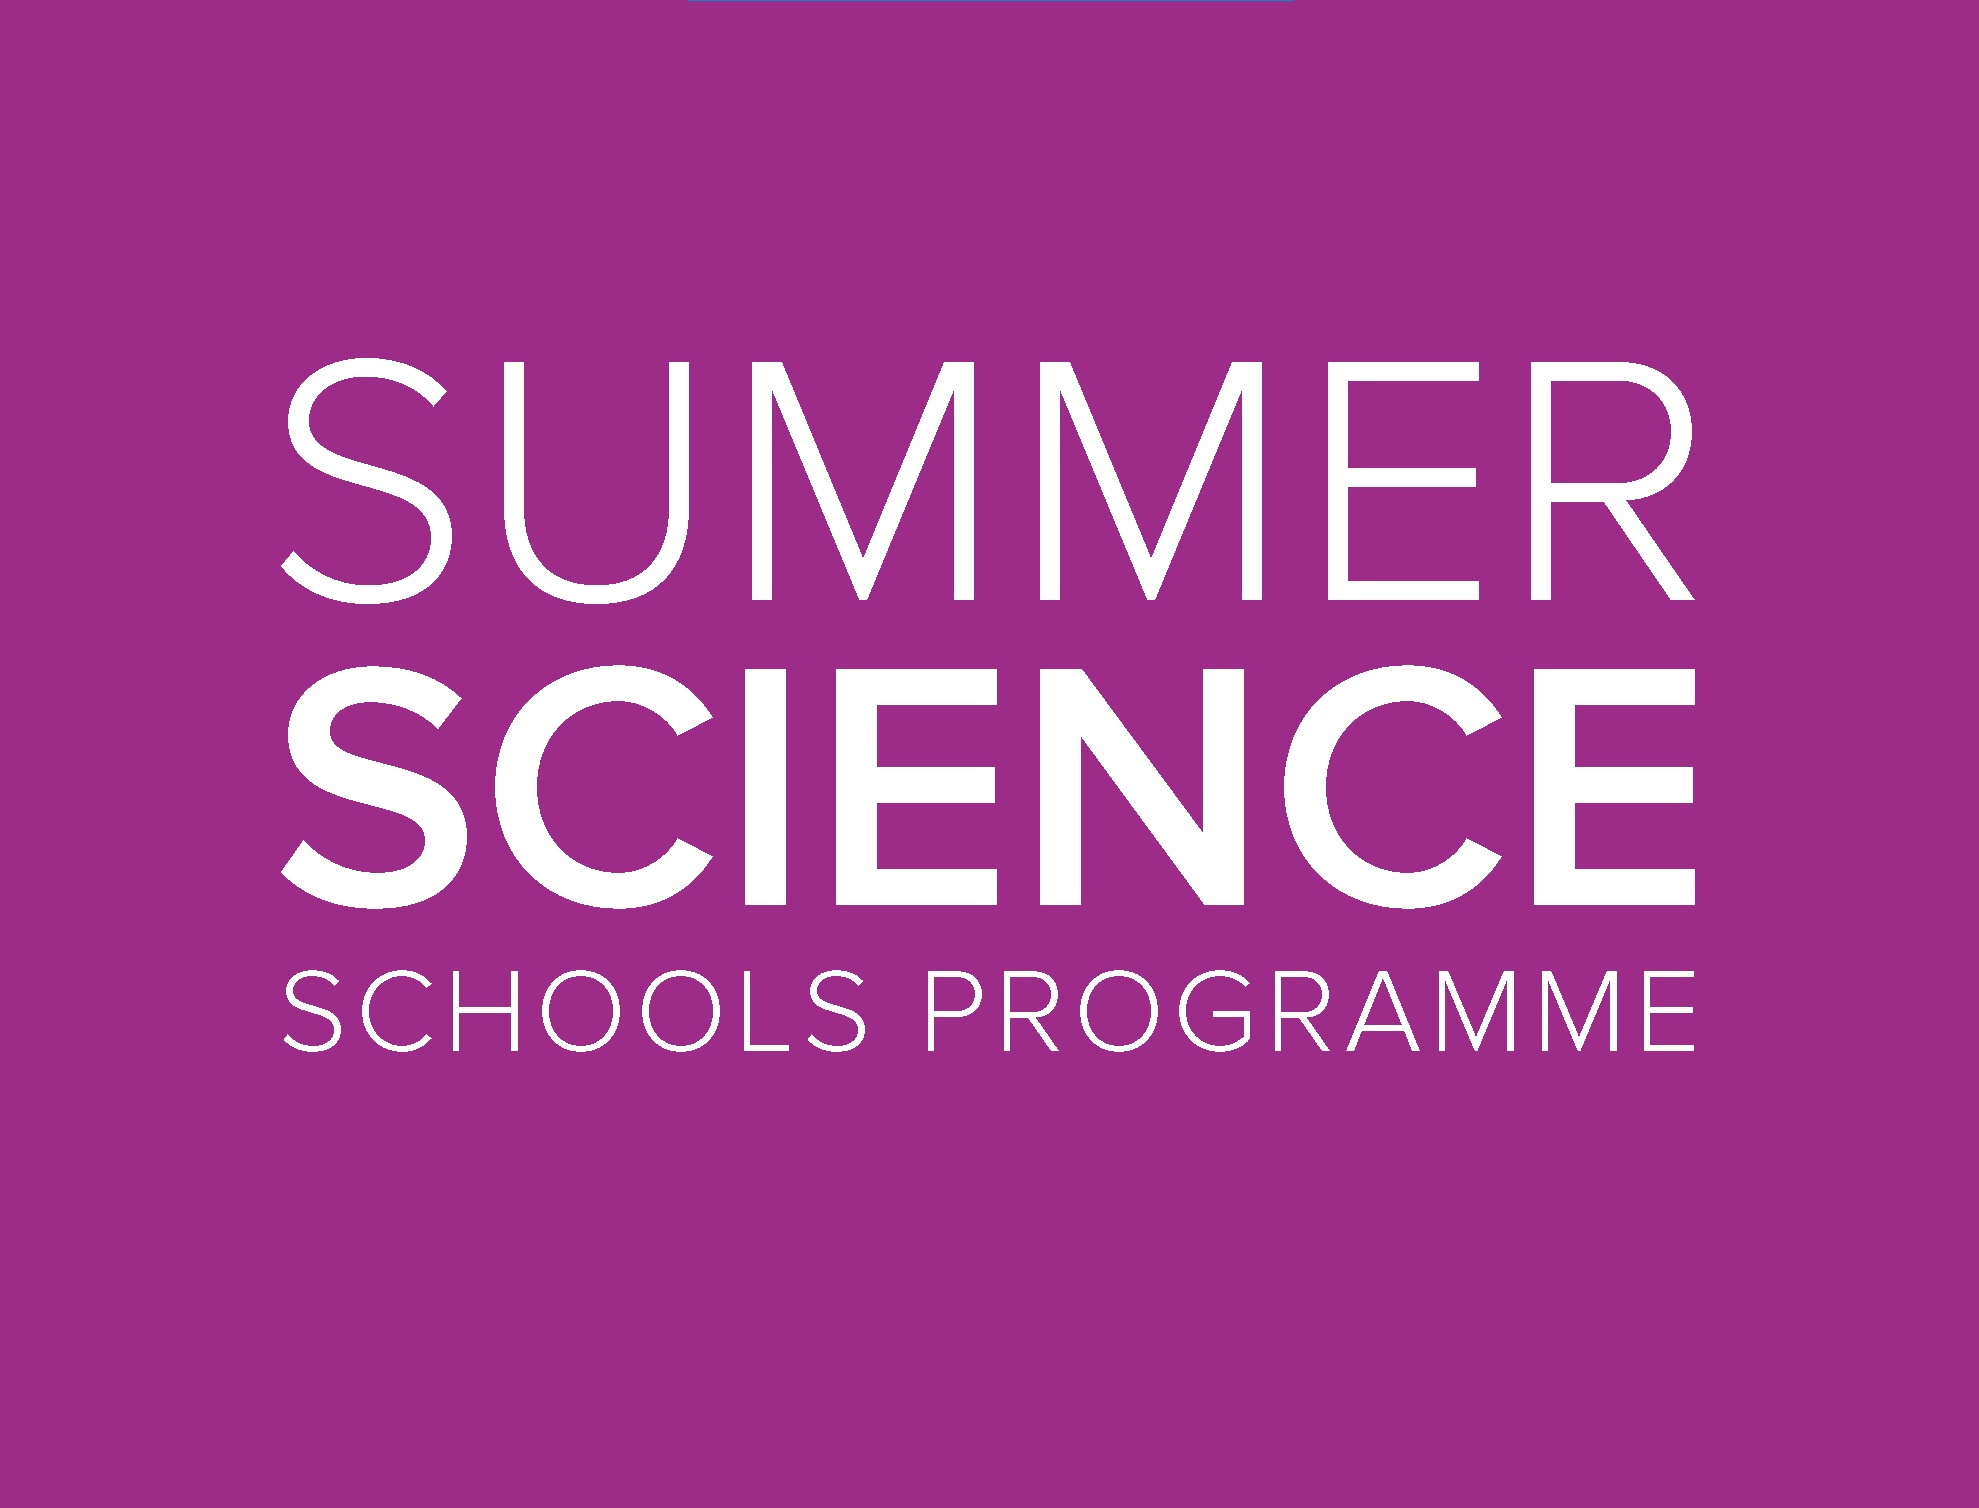 Summer Science Schools programme logo, with purple background